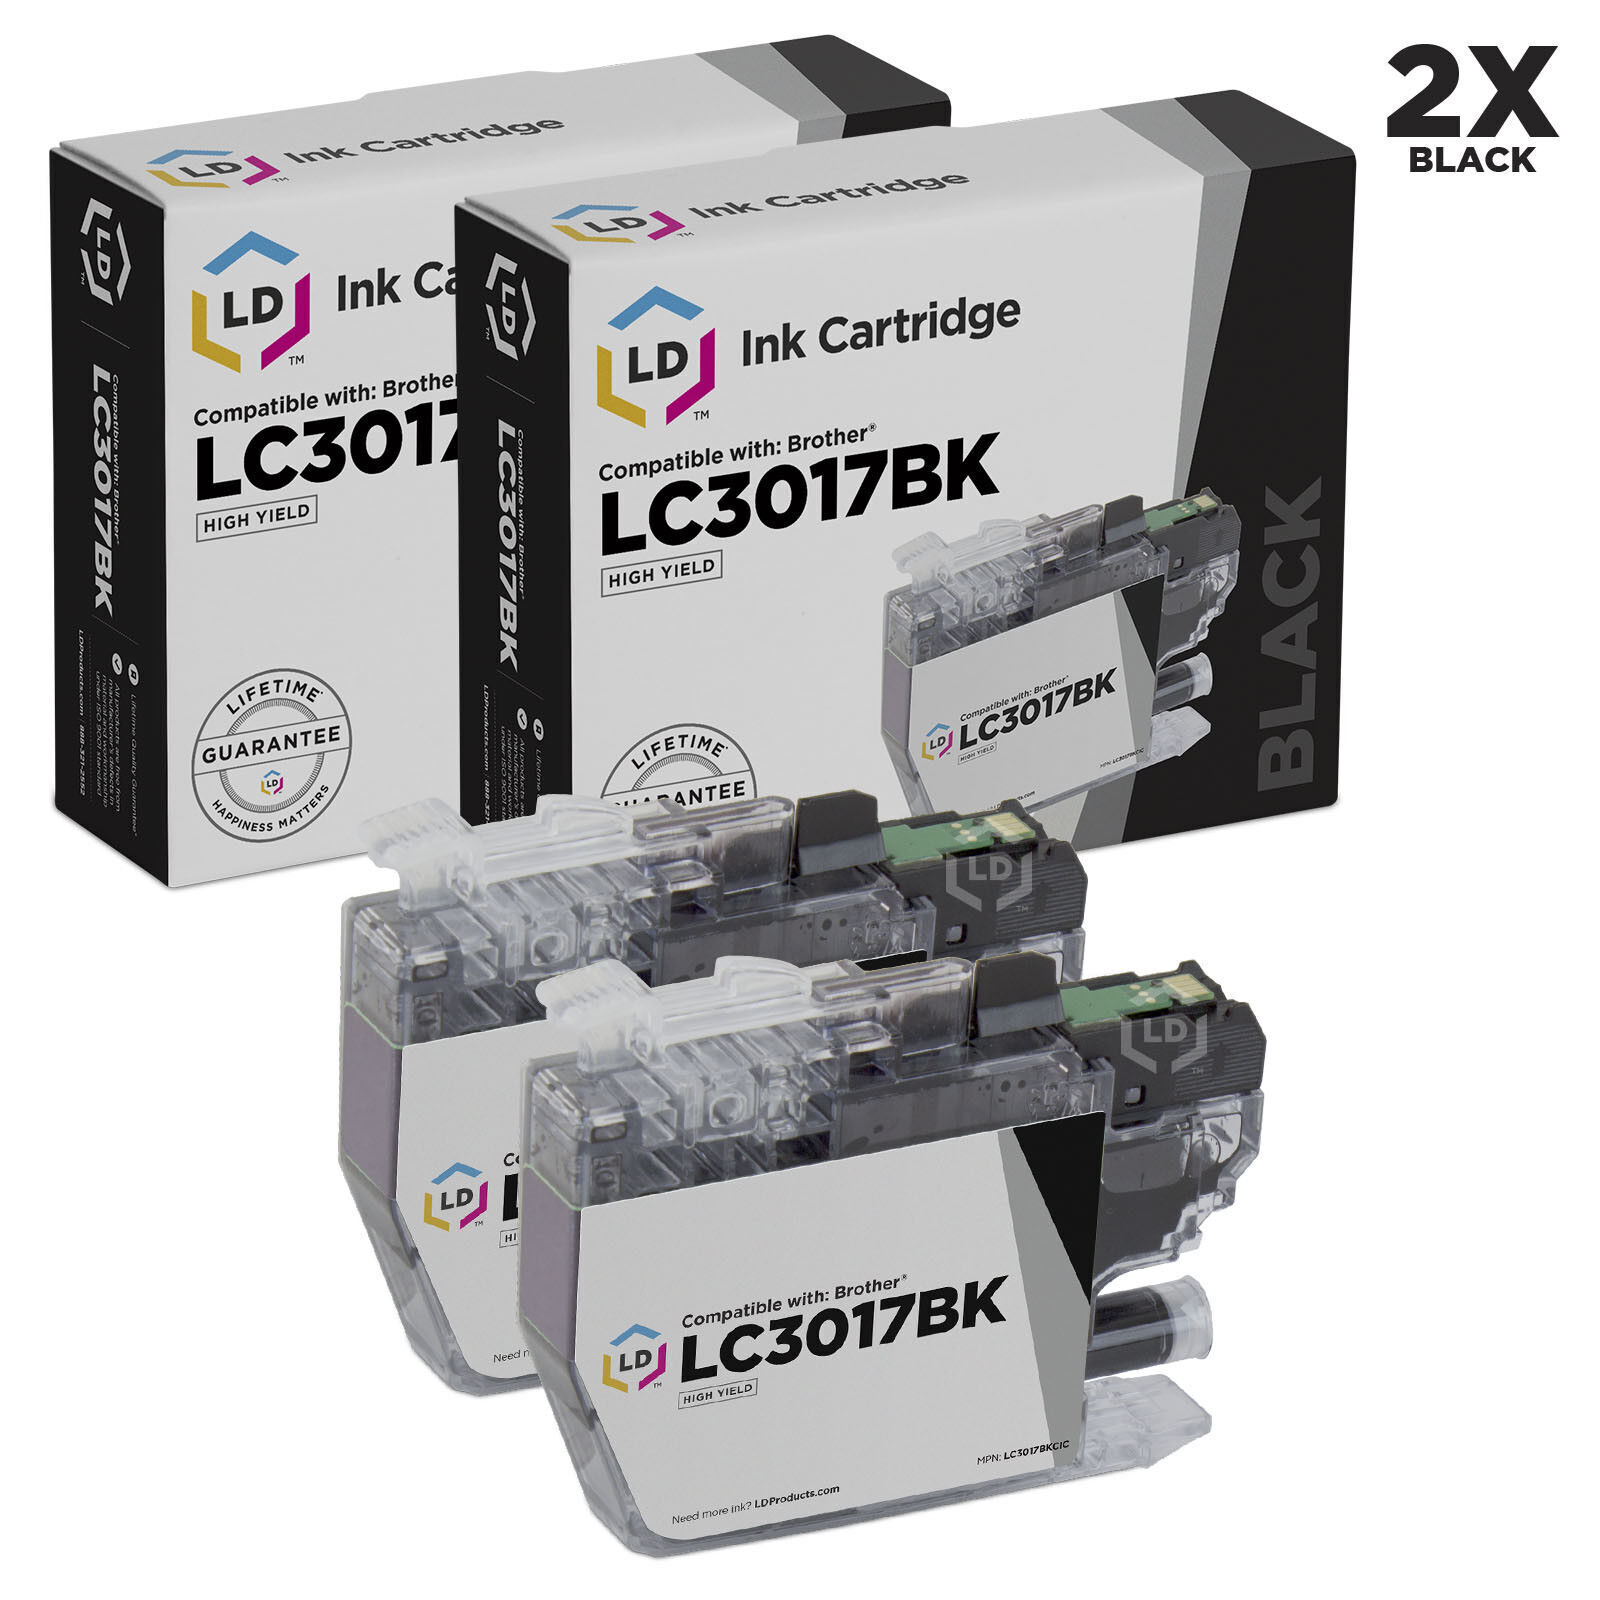 LD Compatible for Brother LC3017BK Set of 2 High Yield Black Ink Cartridges